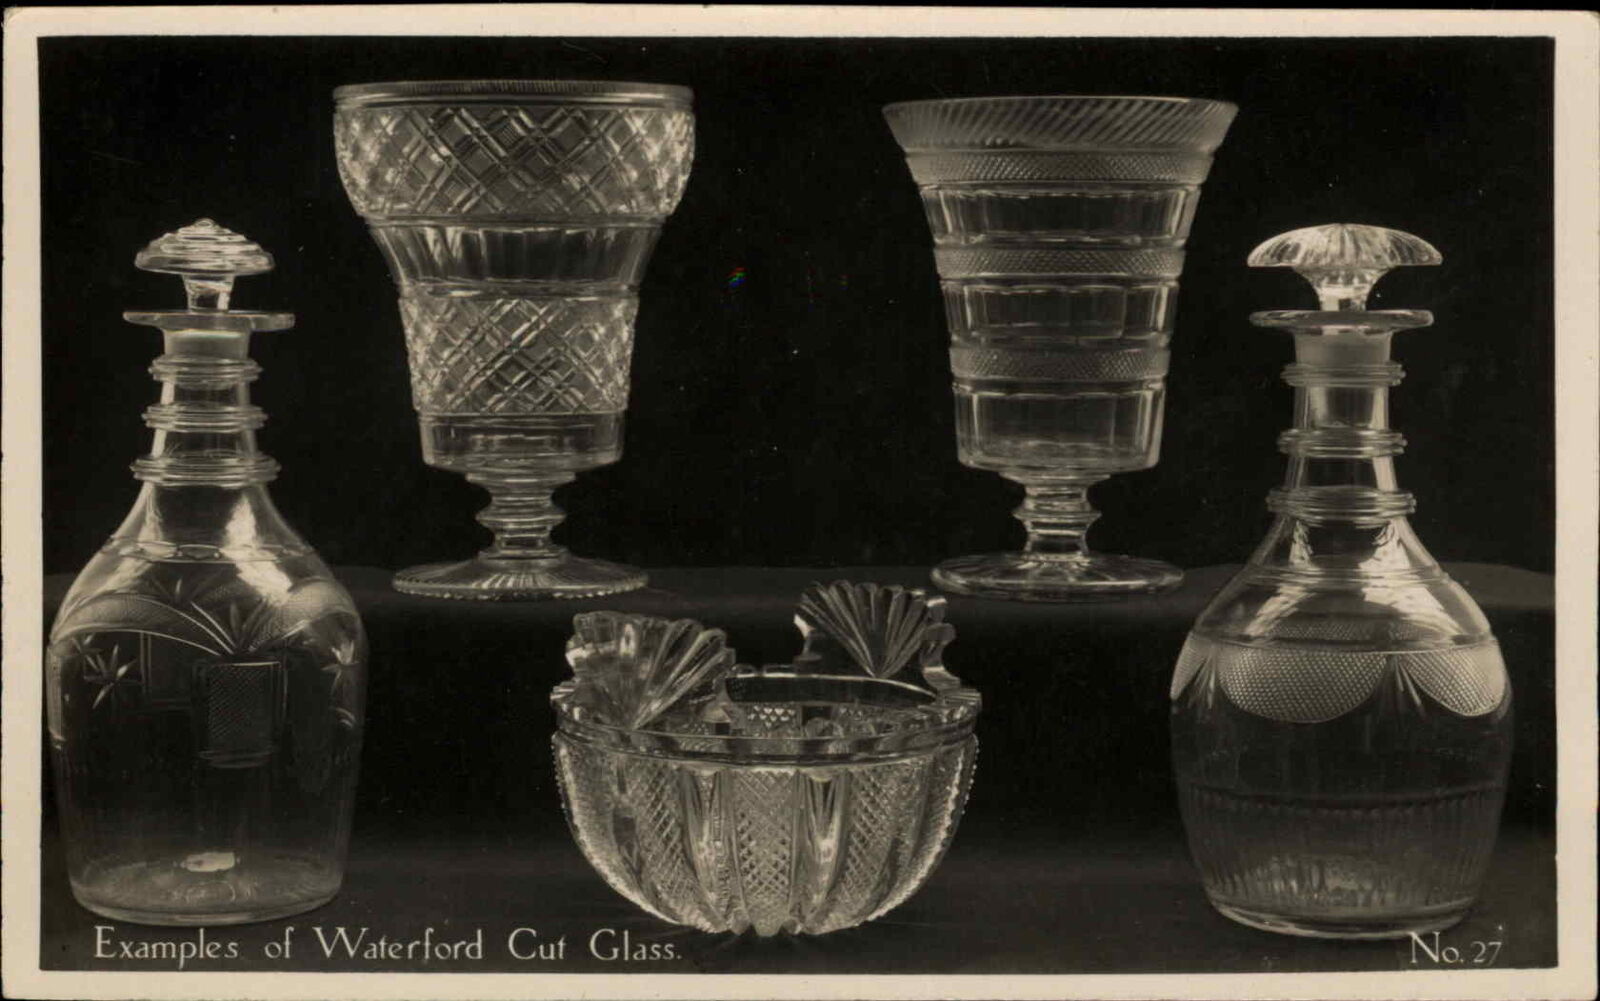 Waterford Cut Glass Glasses Jars Decanters c1910 Real Photo Postcard